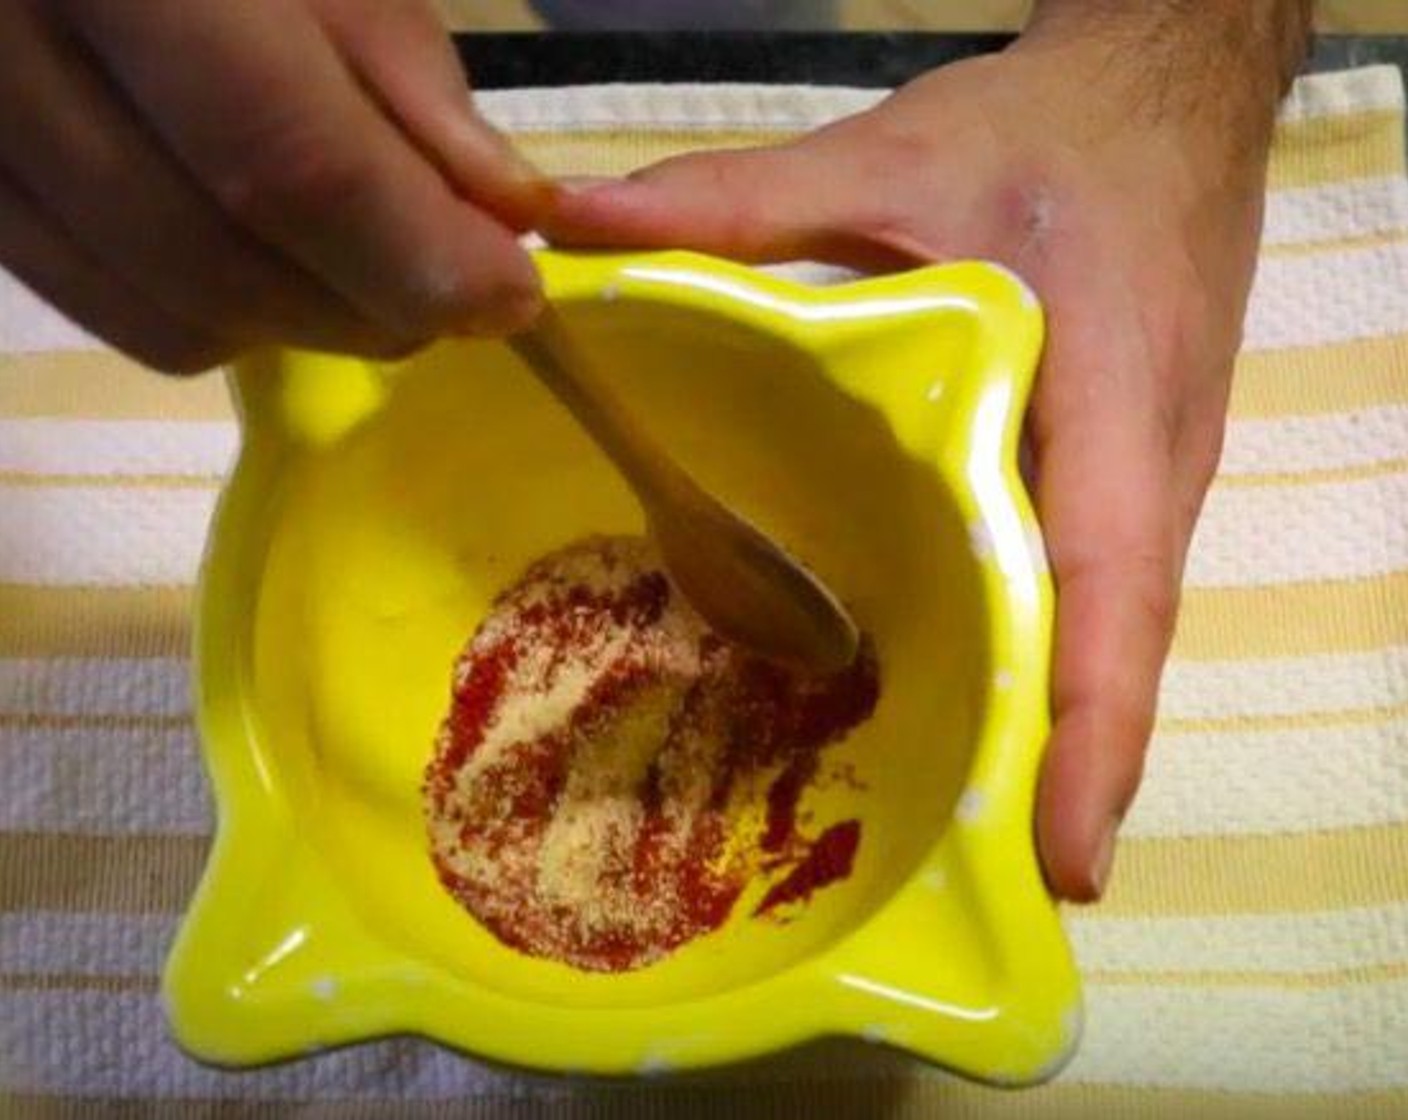 step 4 For the spice blend, add Saffron Threads (1/2 tsp) into a mortar. Using a pestle, pound down until you have a powder, then add McCormick® Garlic Powder (1 tsp), Onion Powder (1 tsp), and Smoked Paprika (1 tsp). Mix together until well combined.